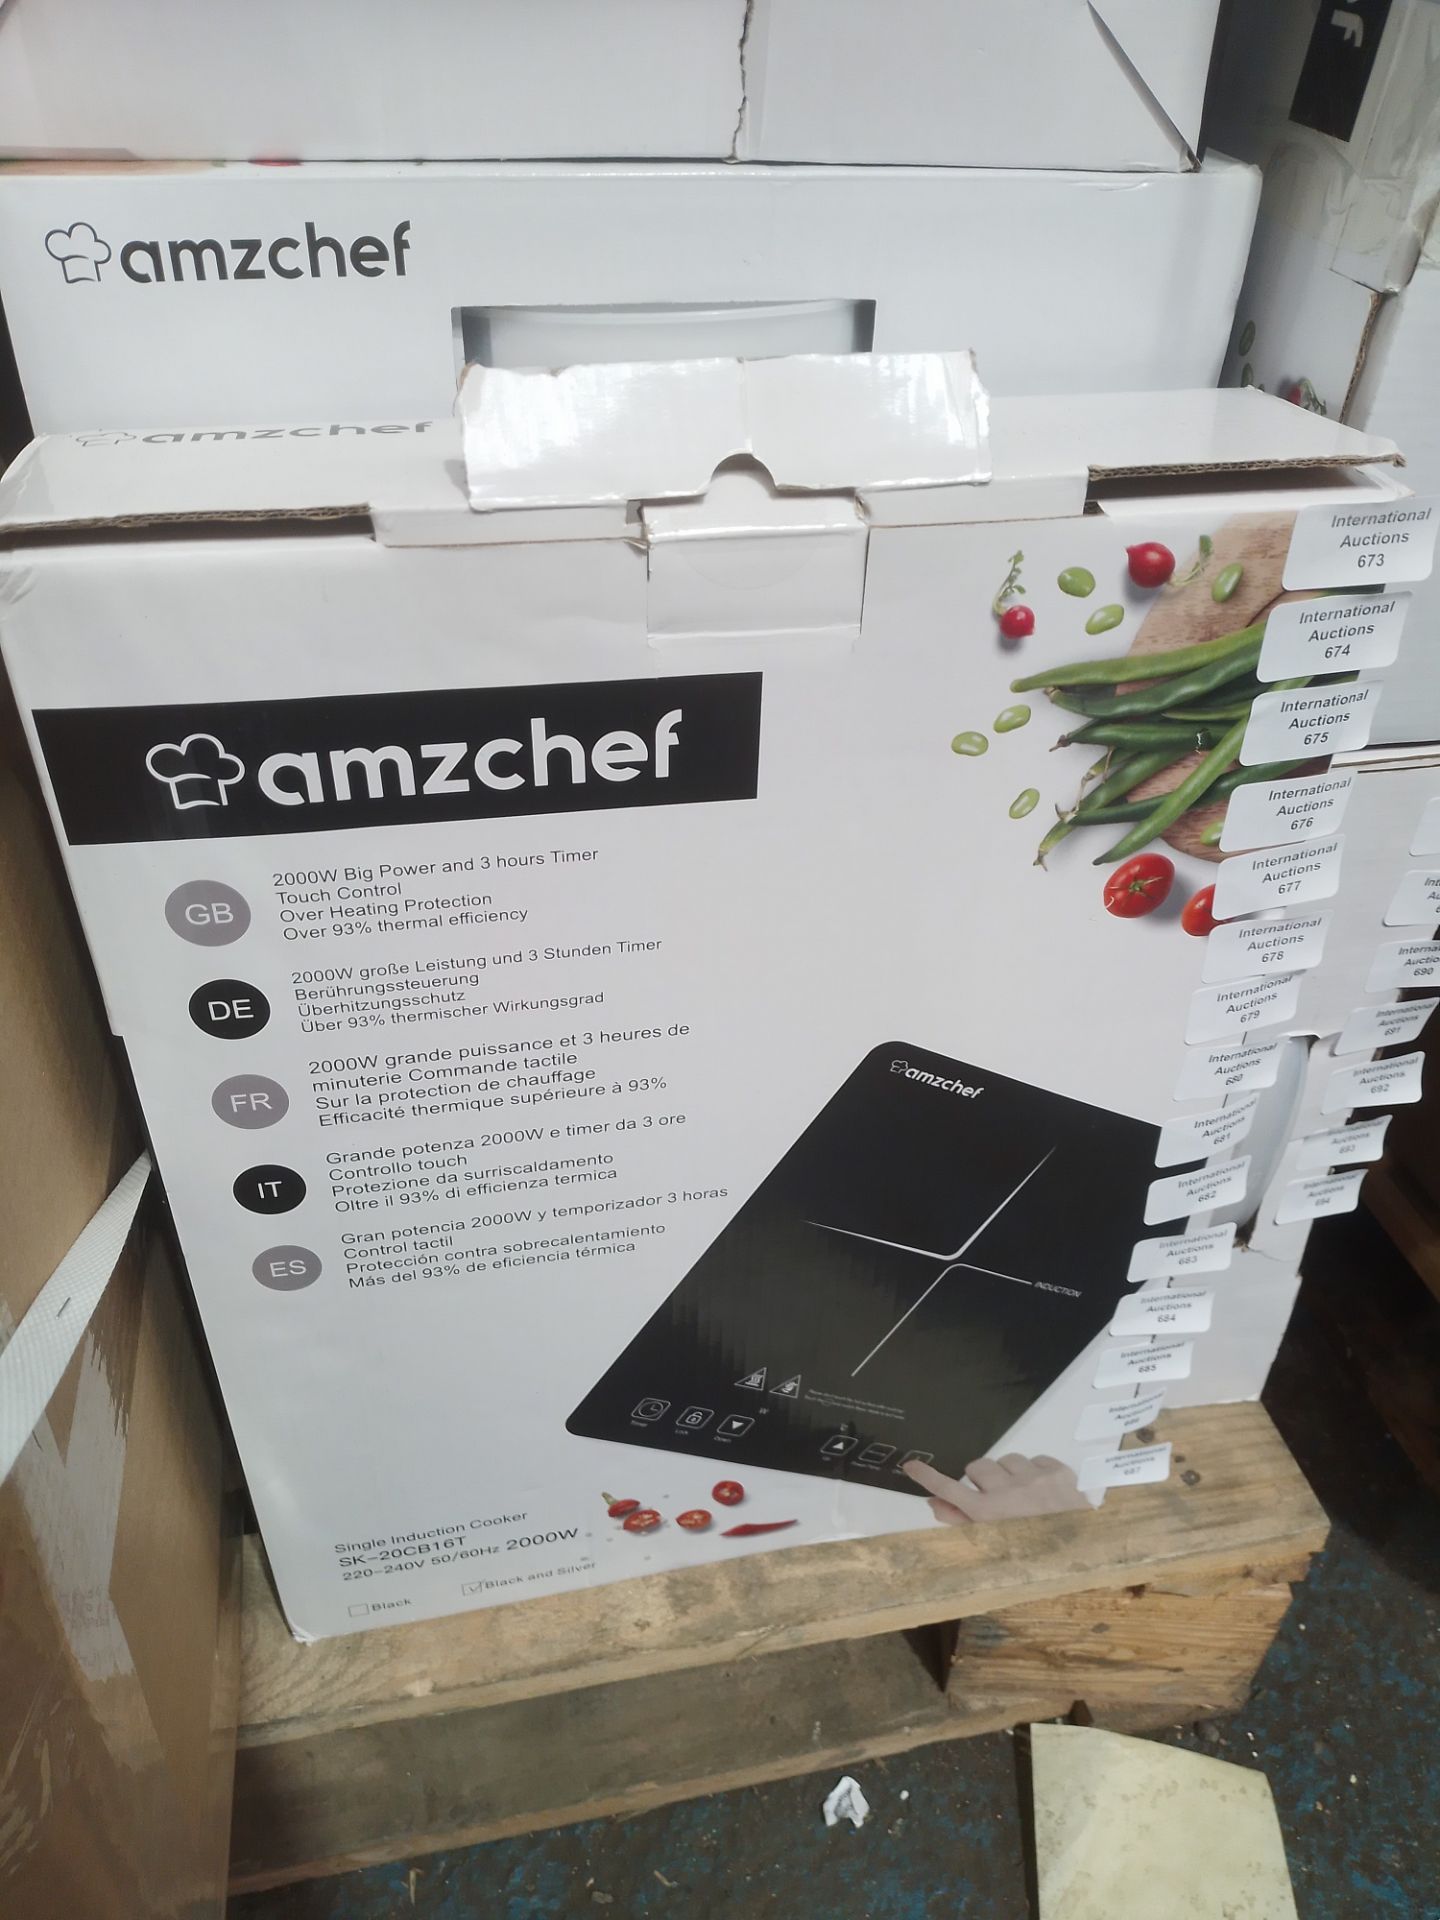 RRP £48.51 AMZCHEF Single Induction Cooker - Image 2 of 2